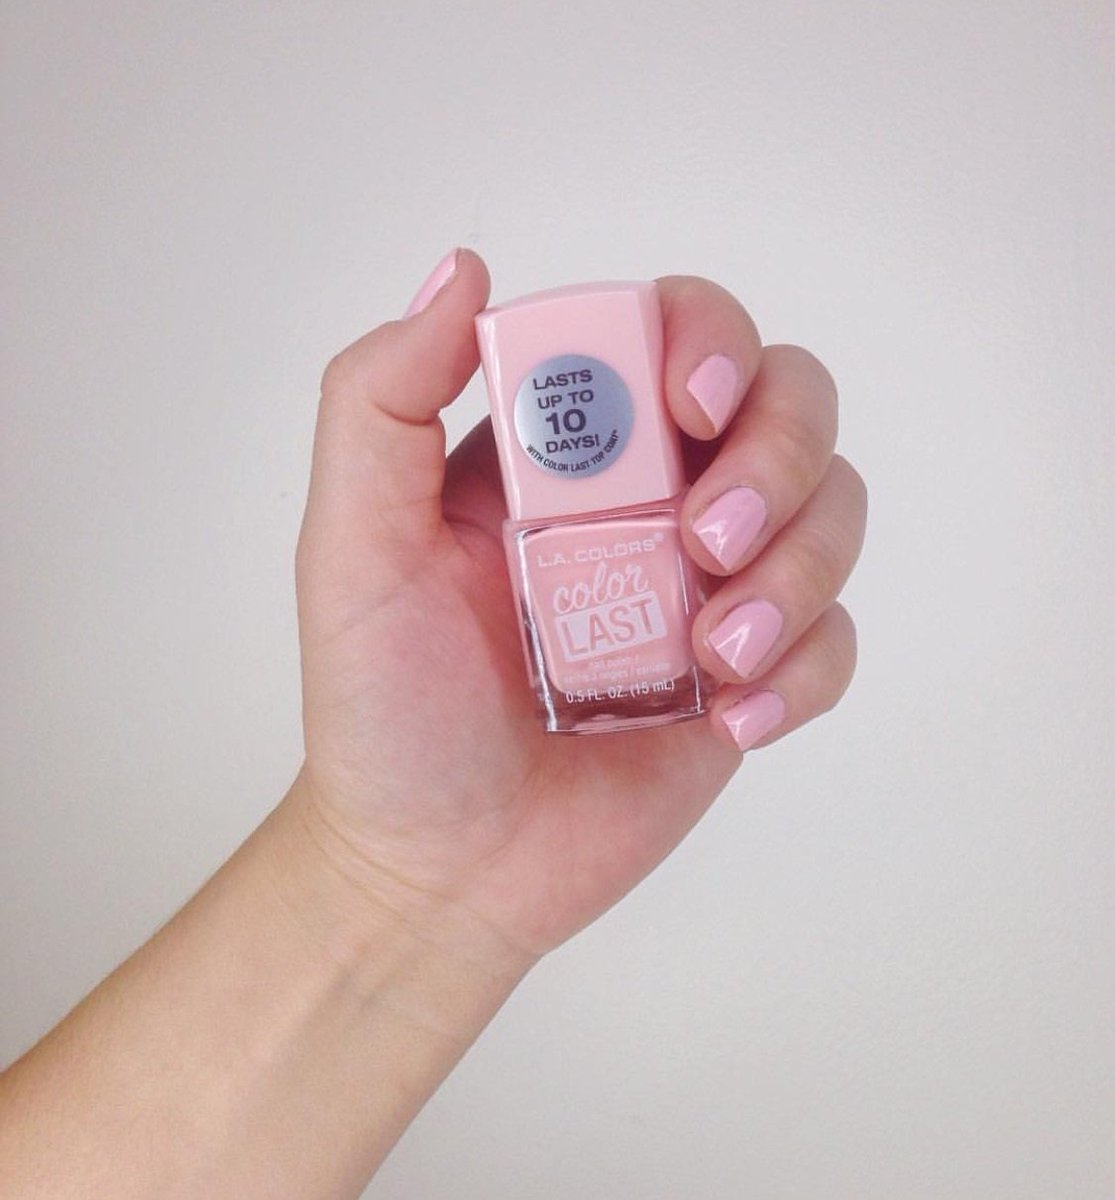 L A Colors Pink Mani By Daisyheadbymary Using Our Color Last Nail Polish In Love Top Off With Our Crystal Top Coat